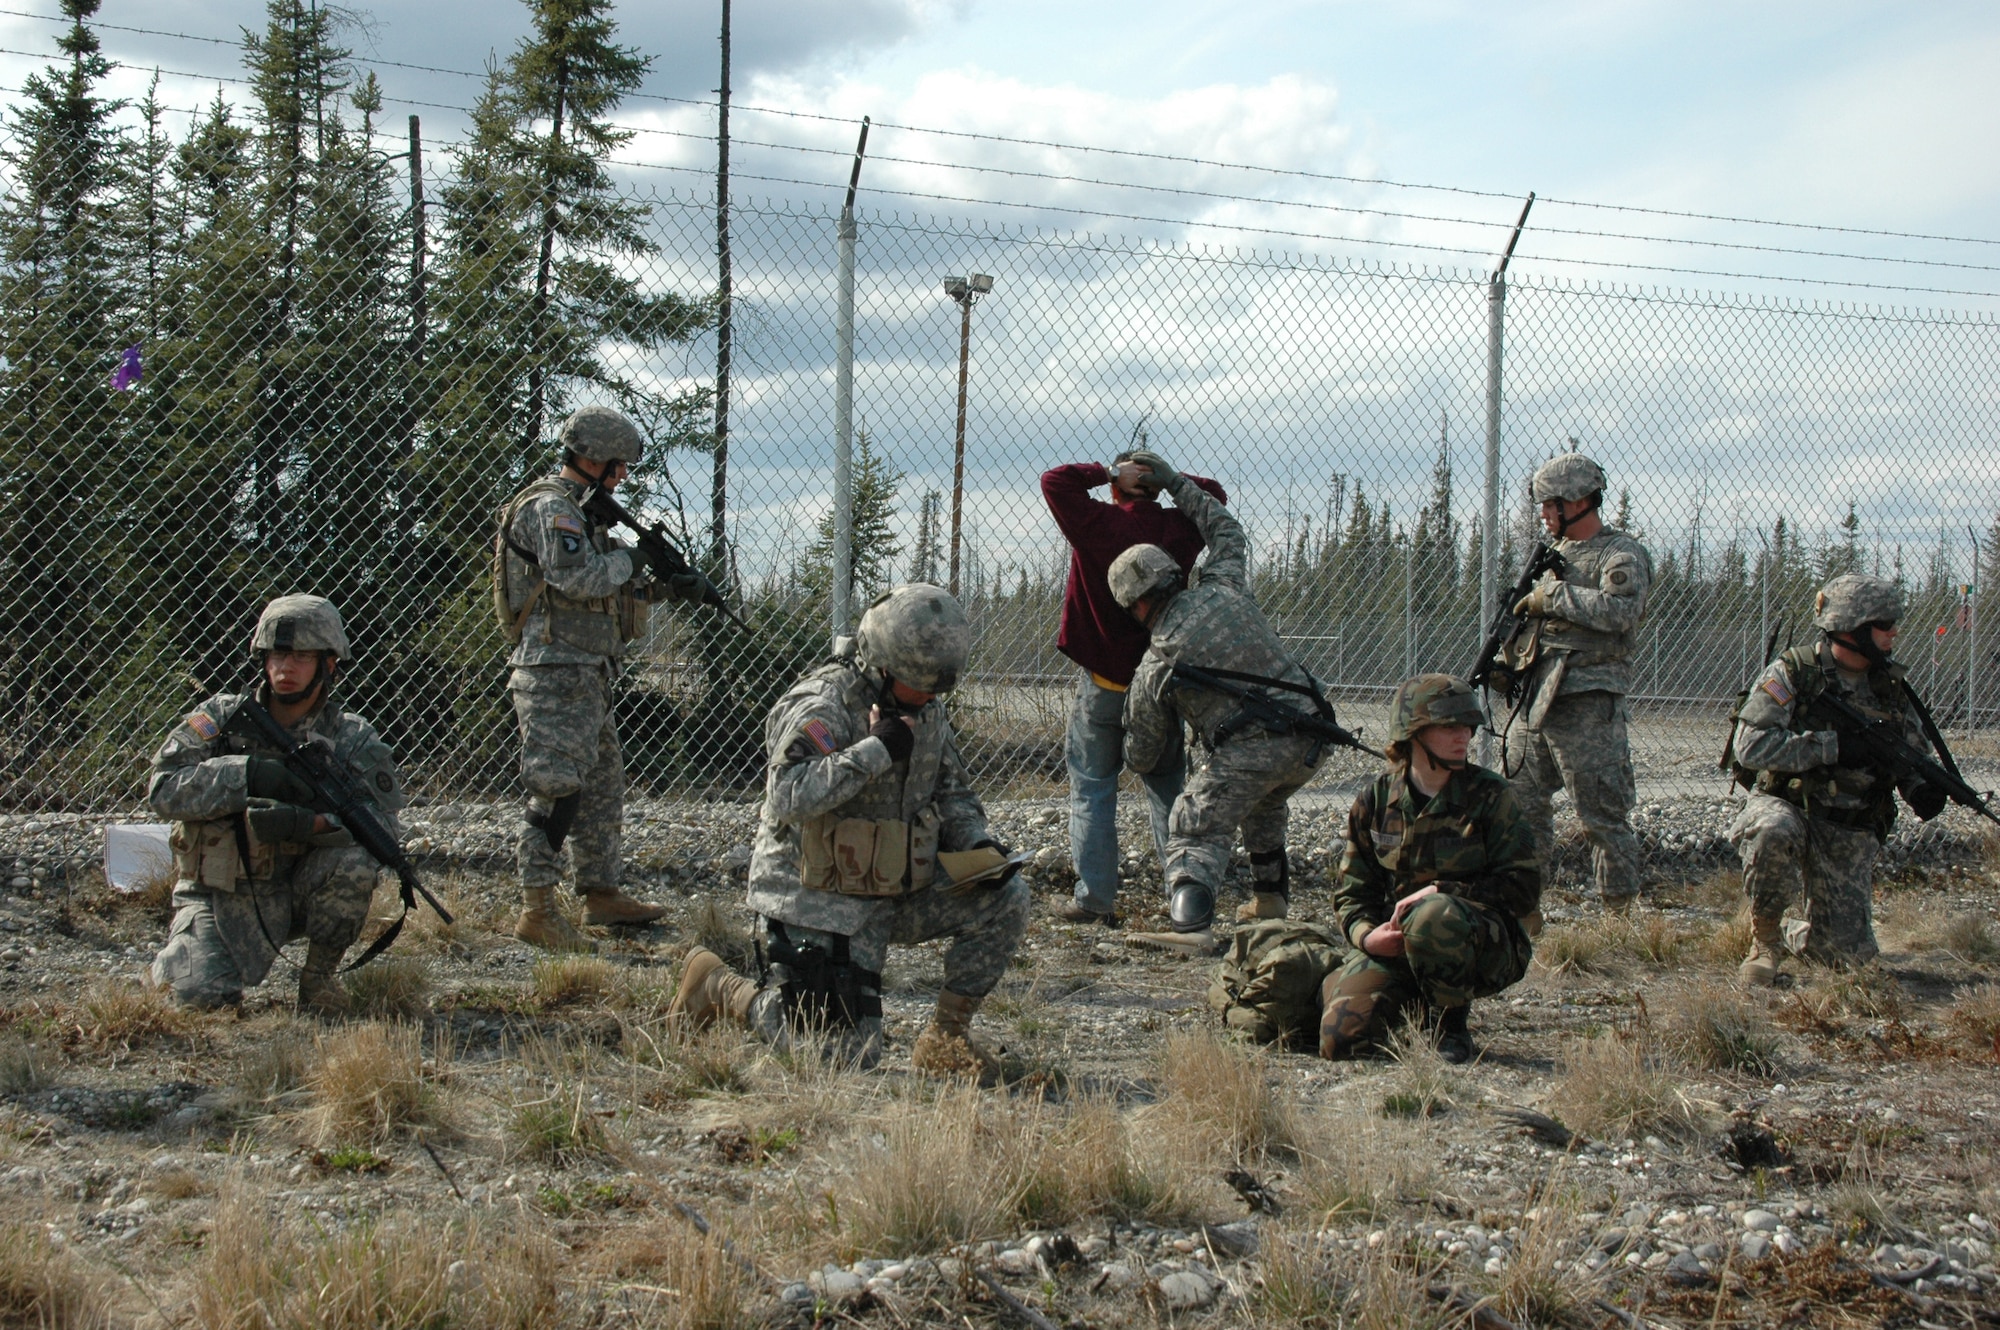 North Pole, Alaska – An Airman and Soldiers contain a suspected terrorist after finding an improvised explosive devise while searching his vehicle during an Entry Control Point stop.  The ECP was established by members of the Nebraska National Guard and Alaska Air National Guard as part of an exercise conducted during Alaska Shield / Northern Edge 07.  Exercise Alaska Shield / Northern Edge 07 is a state of Alaska / US Northern Command sponsored homeland defense and defense support of civil authorities exercise; part of the national-level Ardent Sentry / Northern Edge 07 exercise.  Photo by Chief Mass Communications Specialist Greg Bingaman.